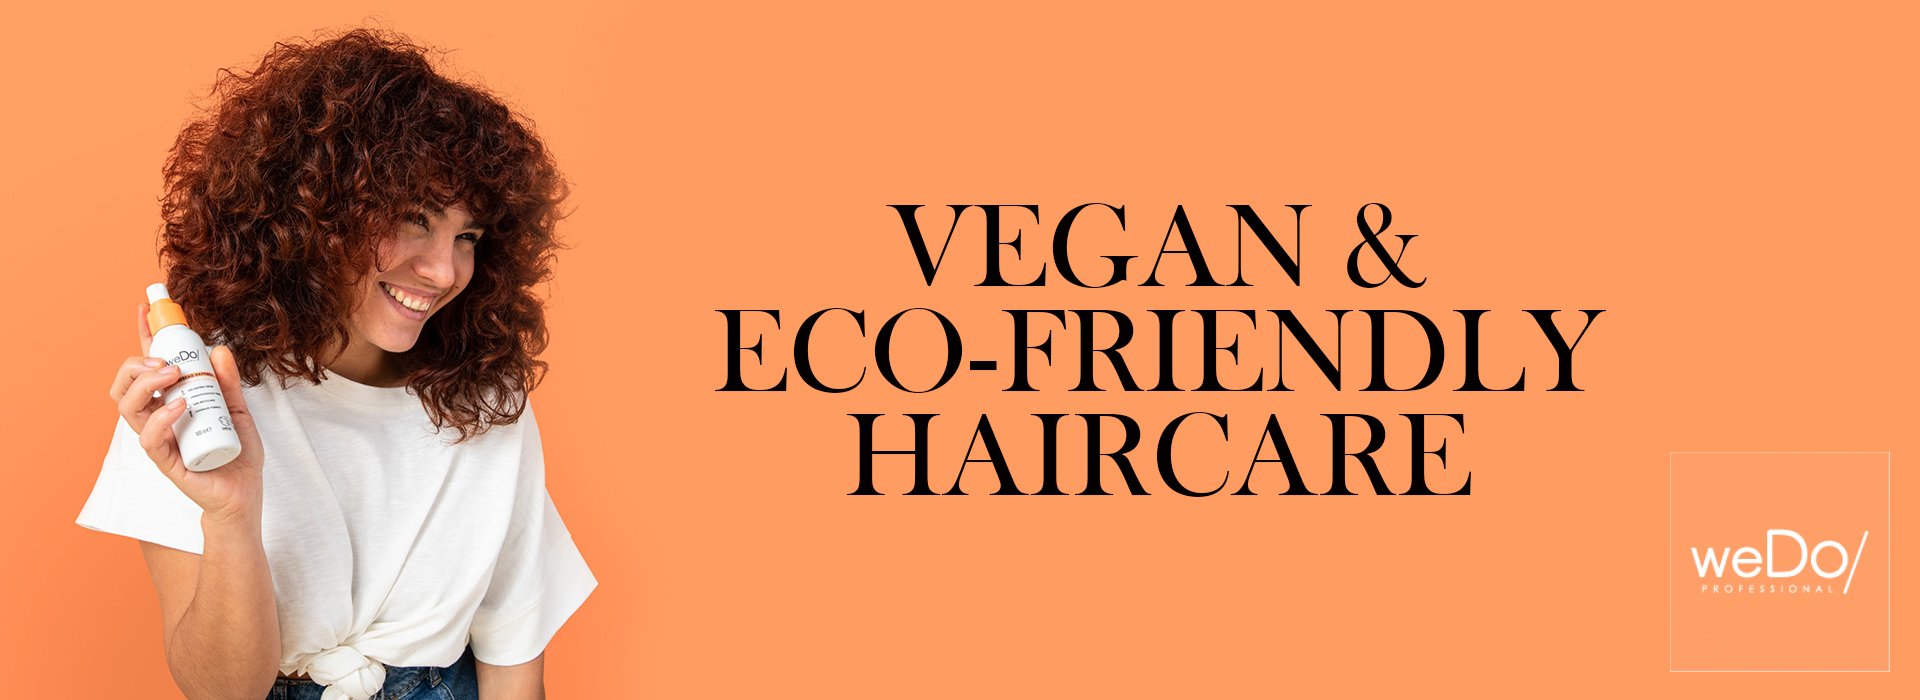 Recyclable, Vegan & Cruelty-Free Haircare